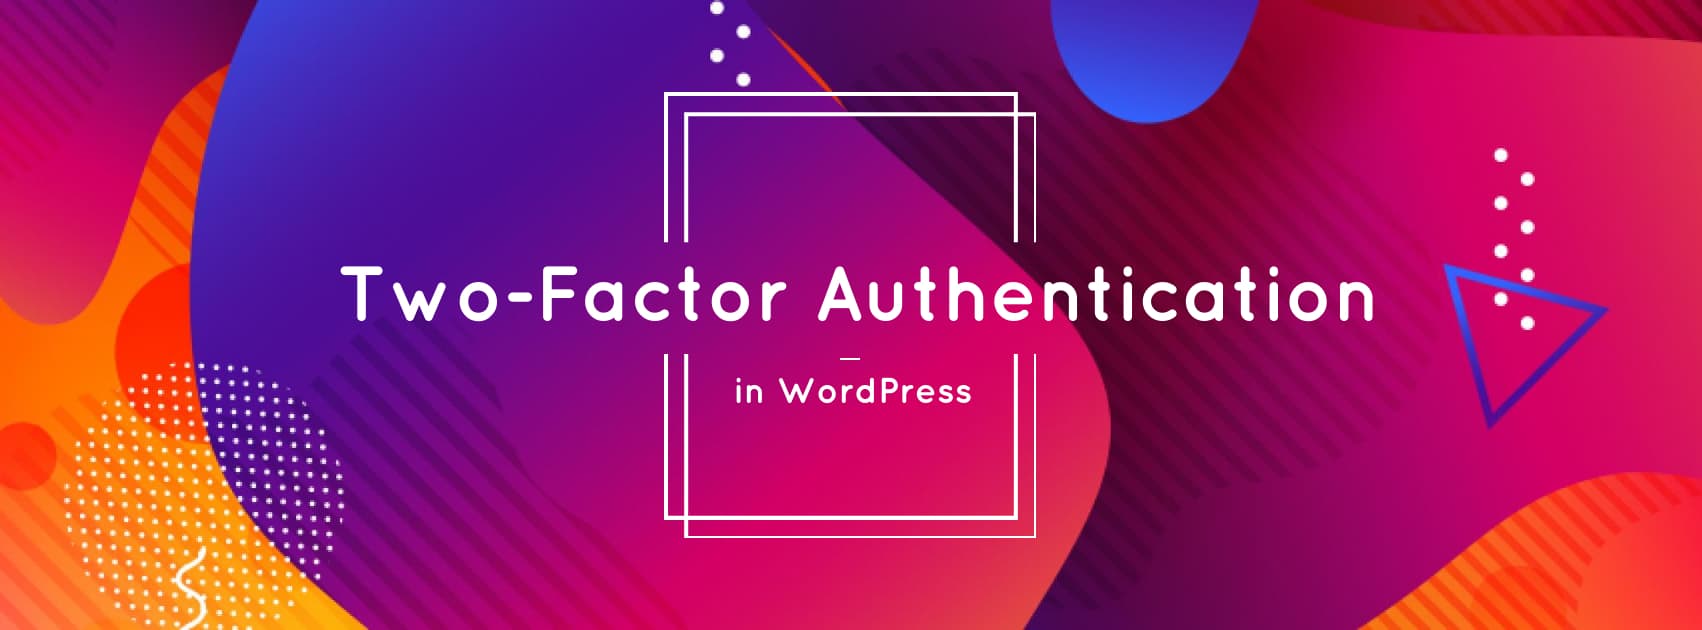 stylish design of two-factor authentication in WordPress type